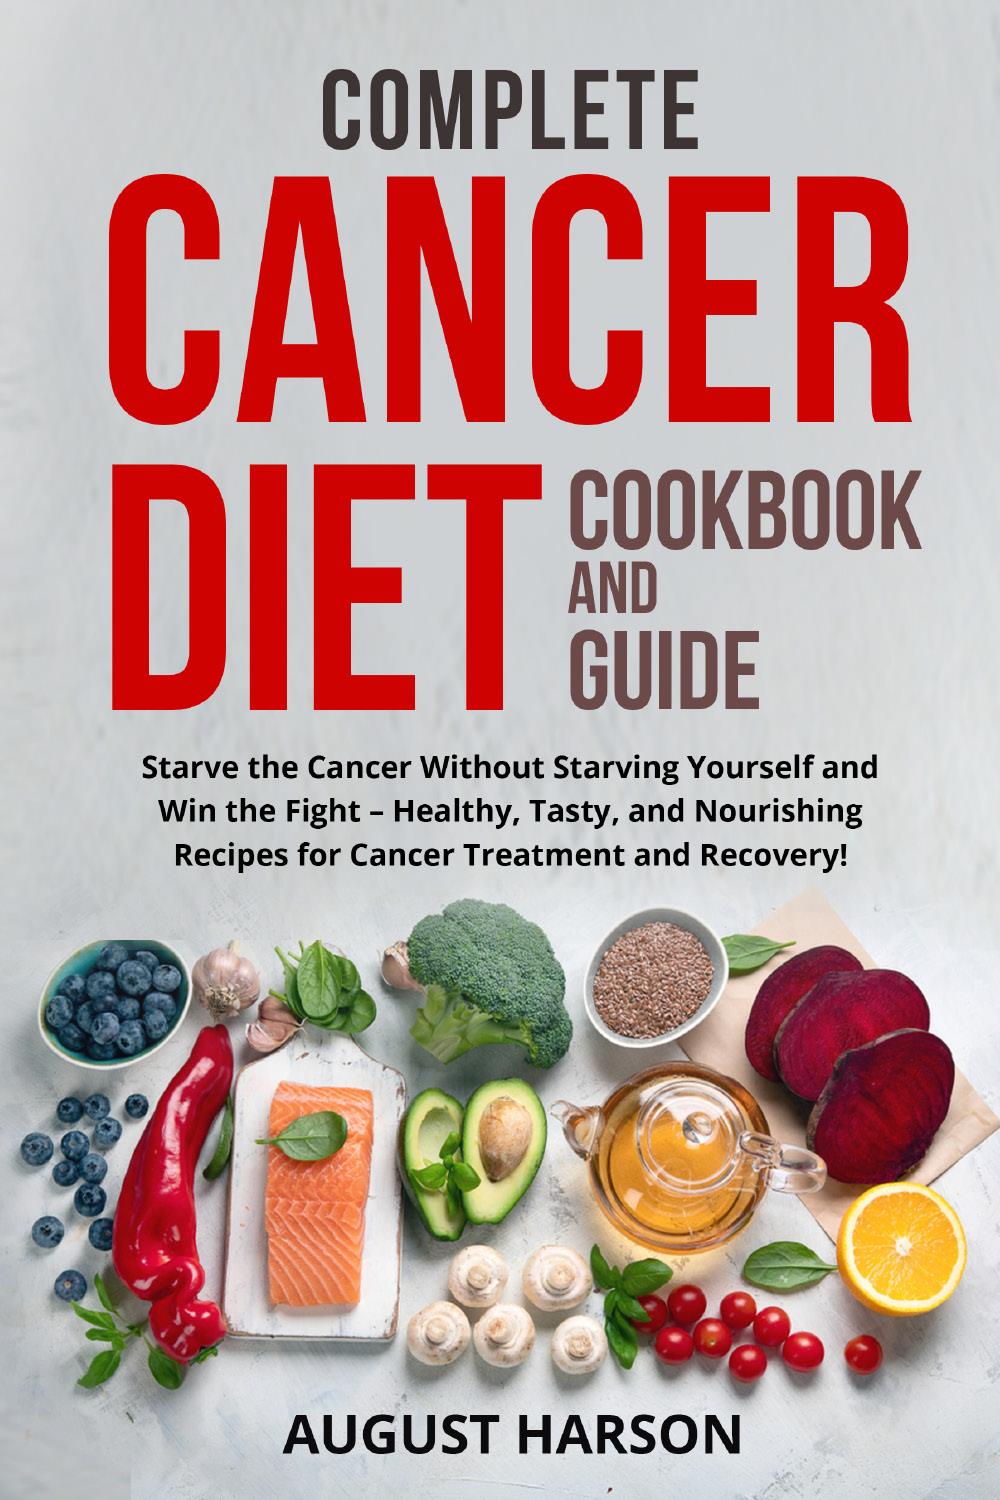 Complete Cancer Diet Cookbook And Guide. Starve the Cancer Without Starving Yourself and Win the Fight – Healthy, Tasty,and Nourishing Recipes for Cancer Treatment and Recovery!